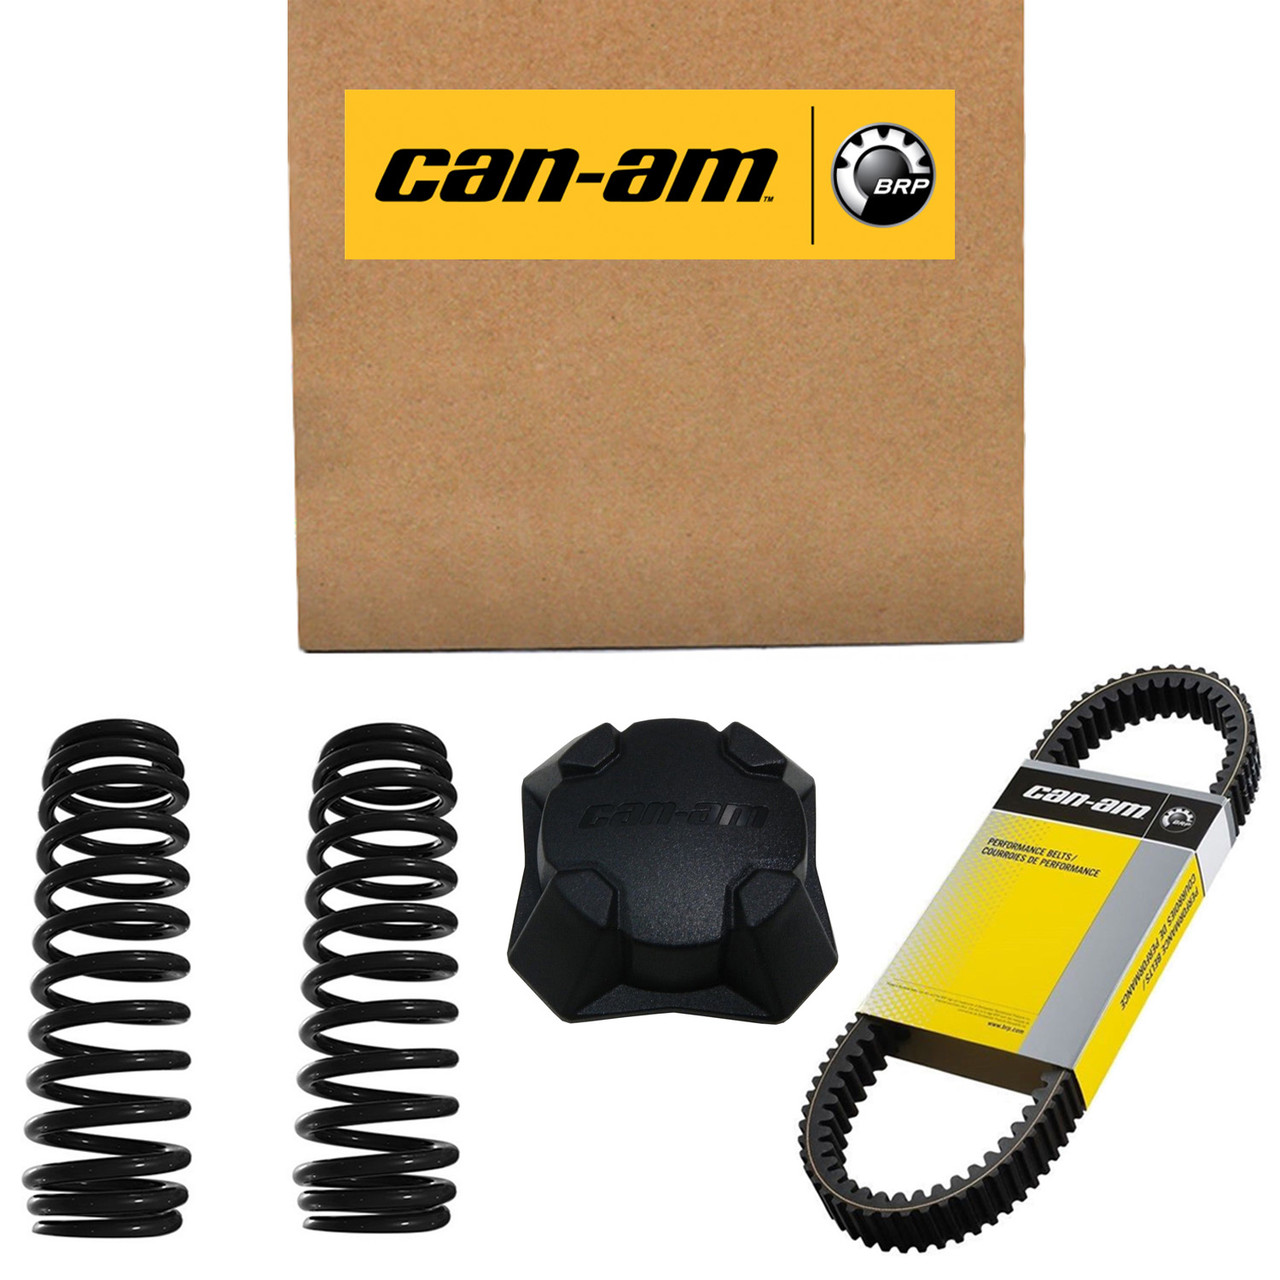 Can-Am New OEM Lat. Label Max Rh, 704906644